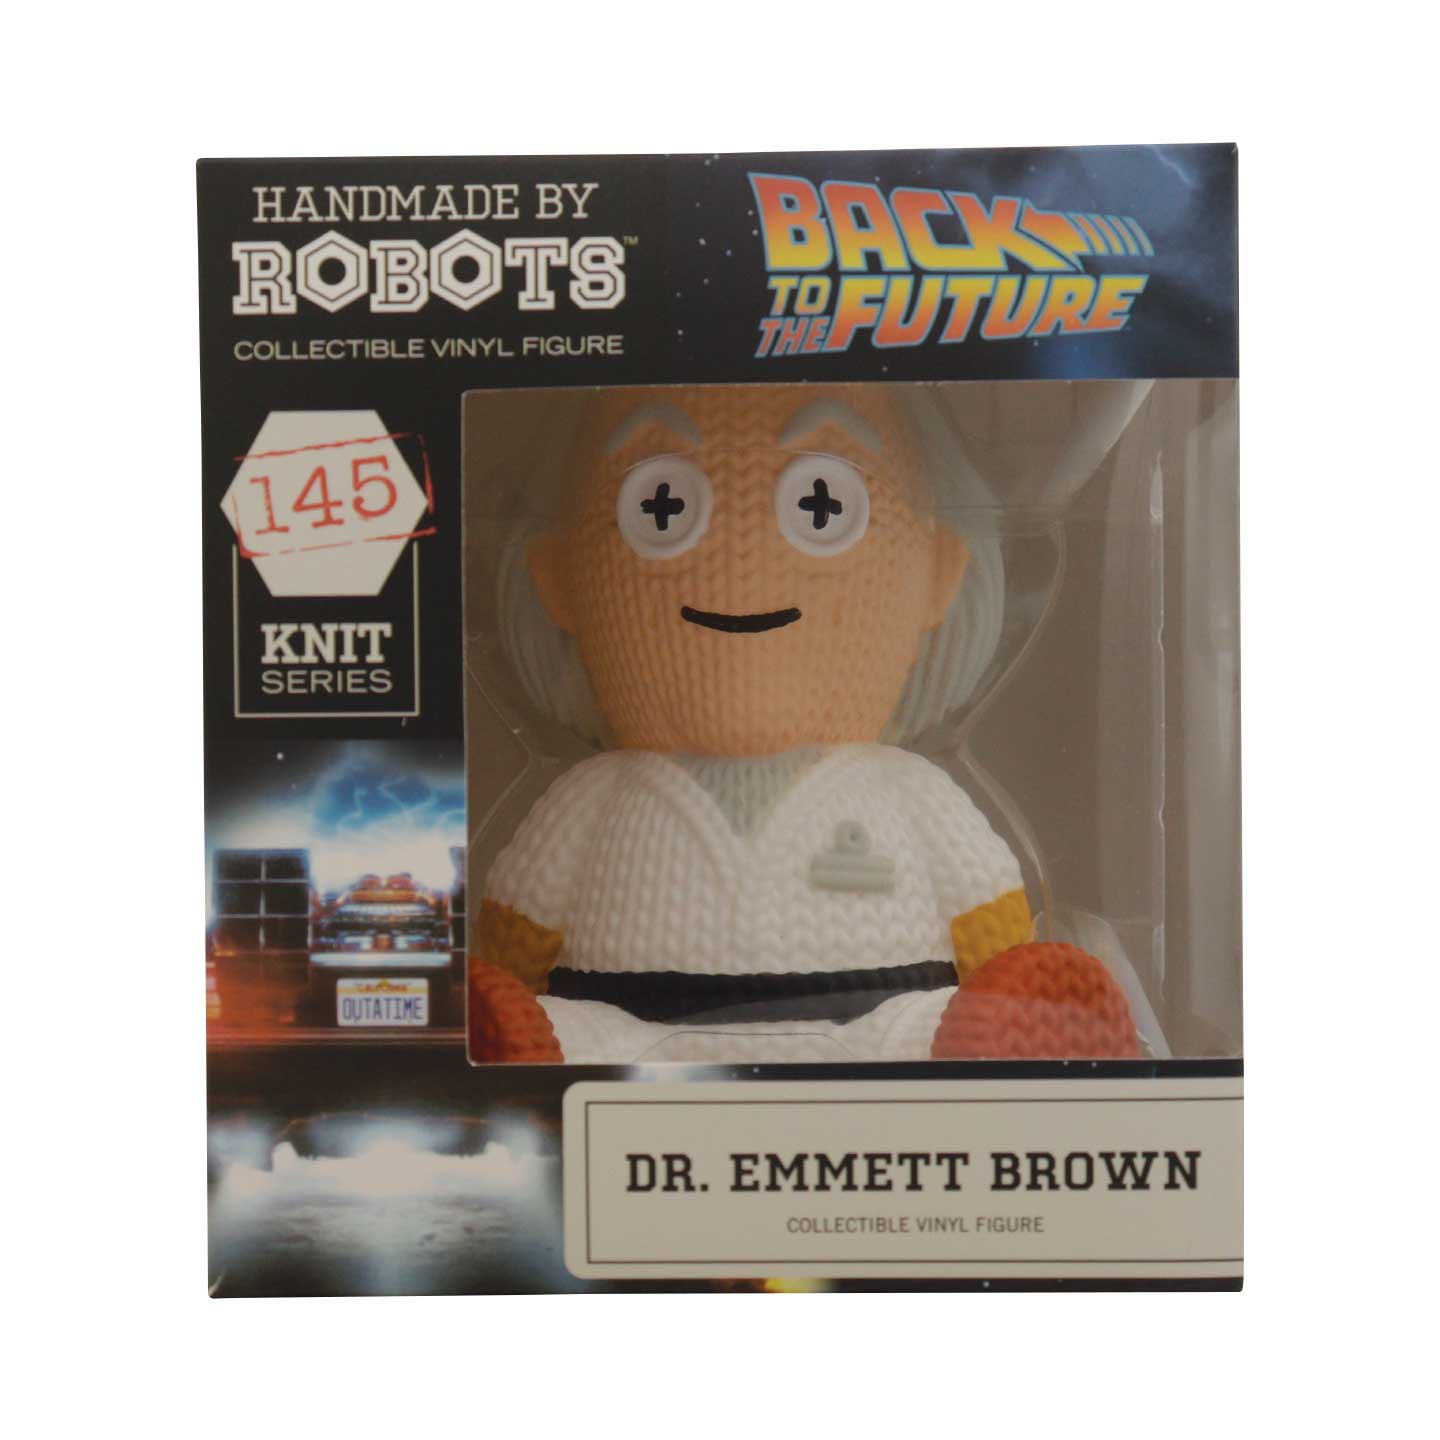 Back to the Future - Doc Brown Collectible Vinyl Figure from Handmade by Robots